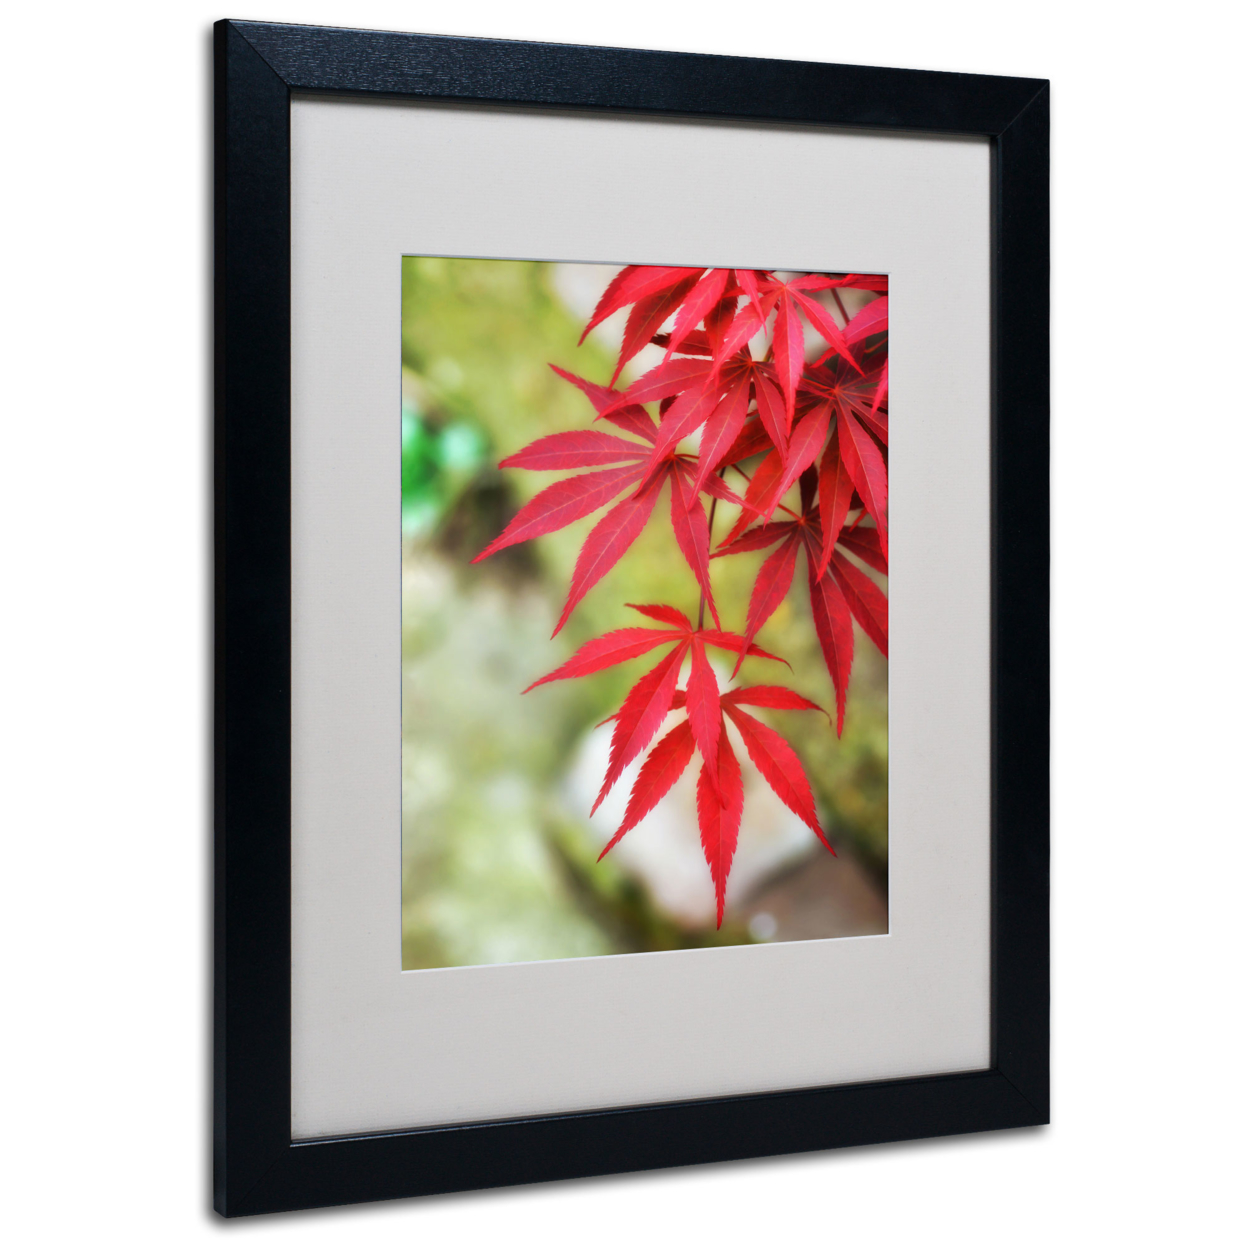 Philippe Sainte-Laudy 'Japanese Maple' Black Wooden Framed Art 18 X 22 Inches